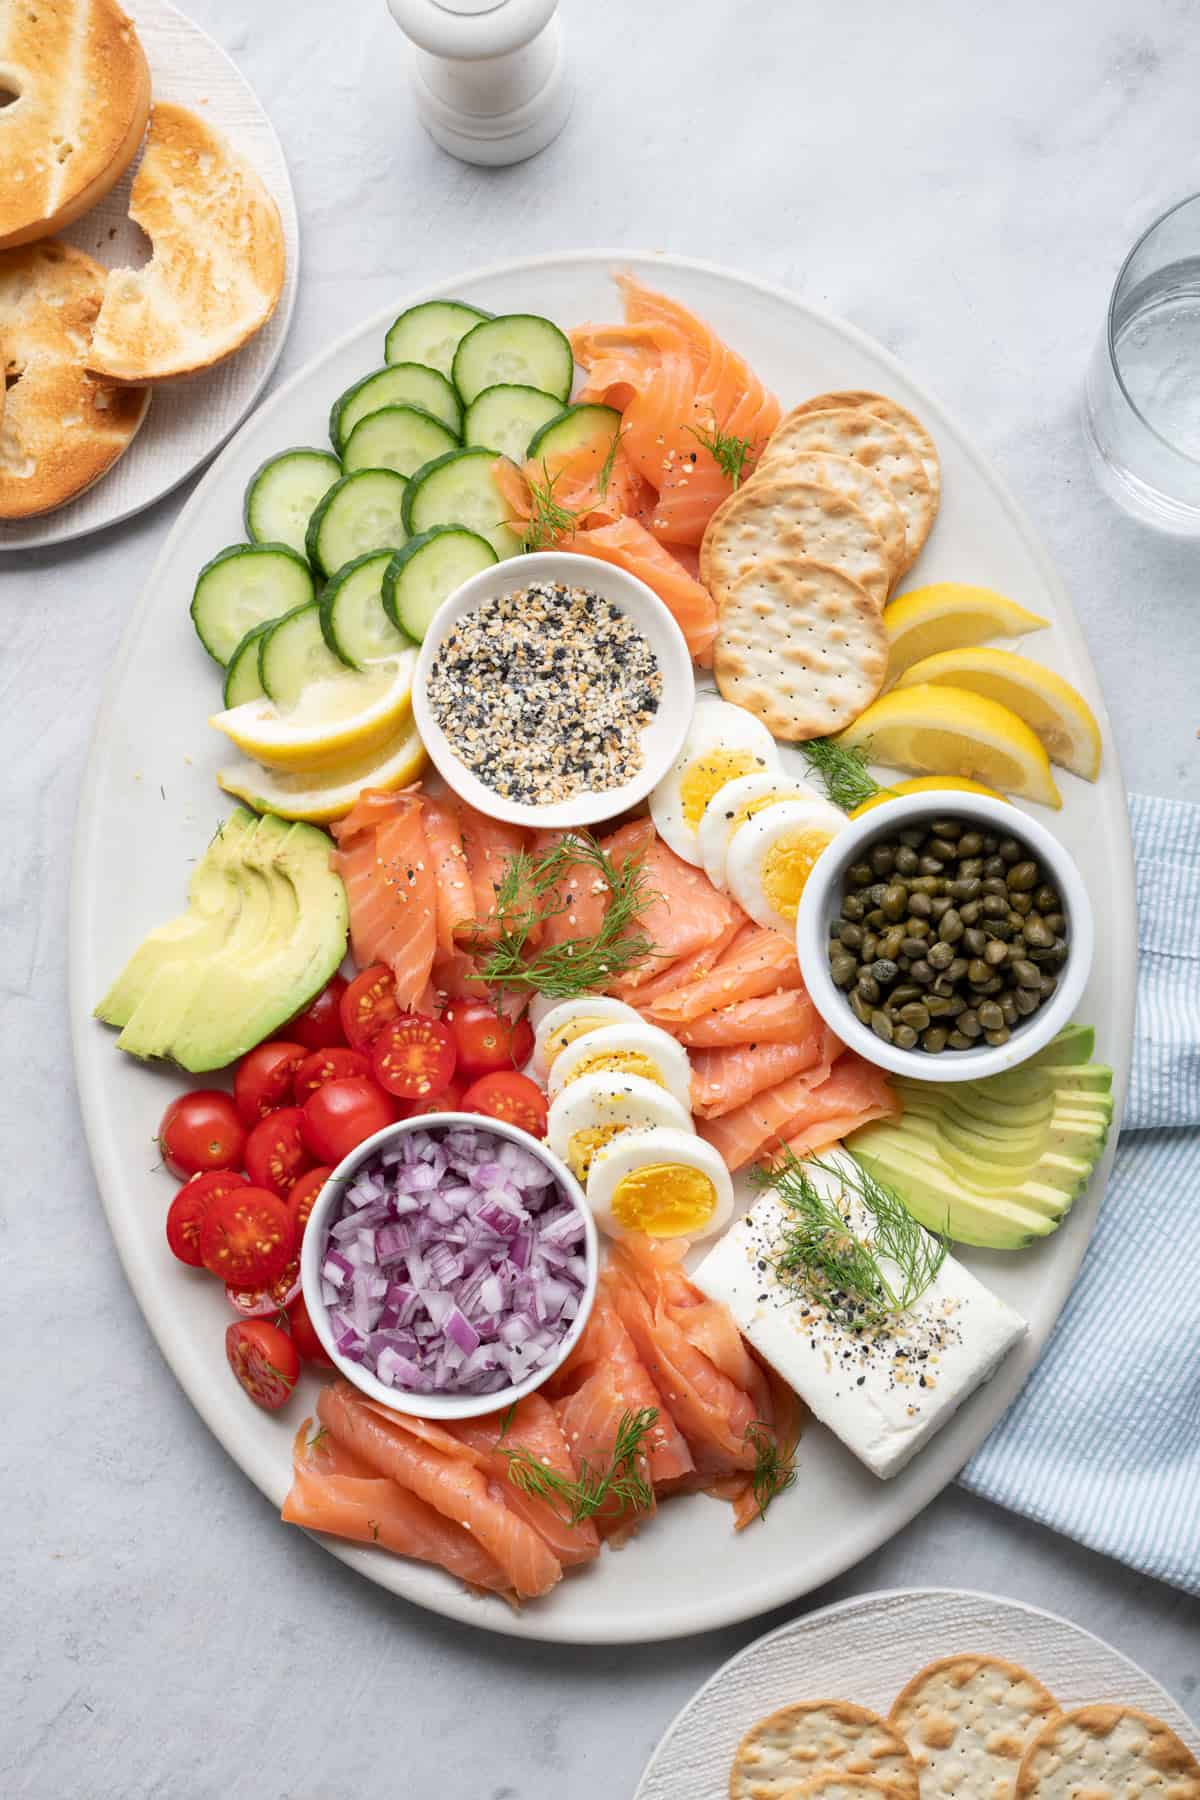 Smoked salmon platter with eggs, cucumber, avocado, tomatoes, crackers and more